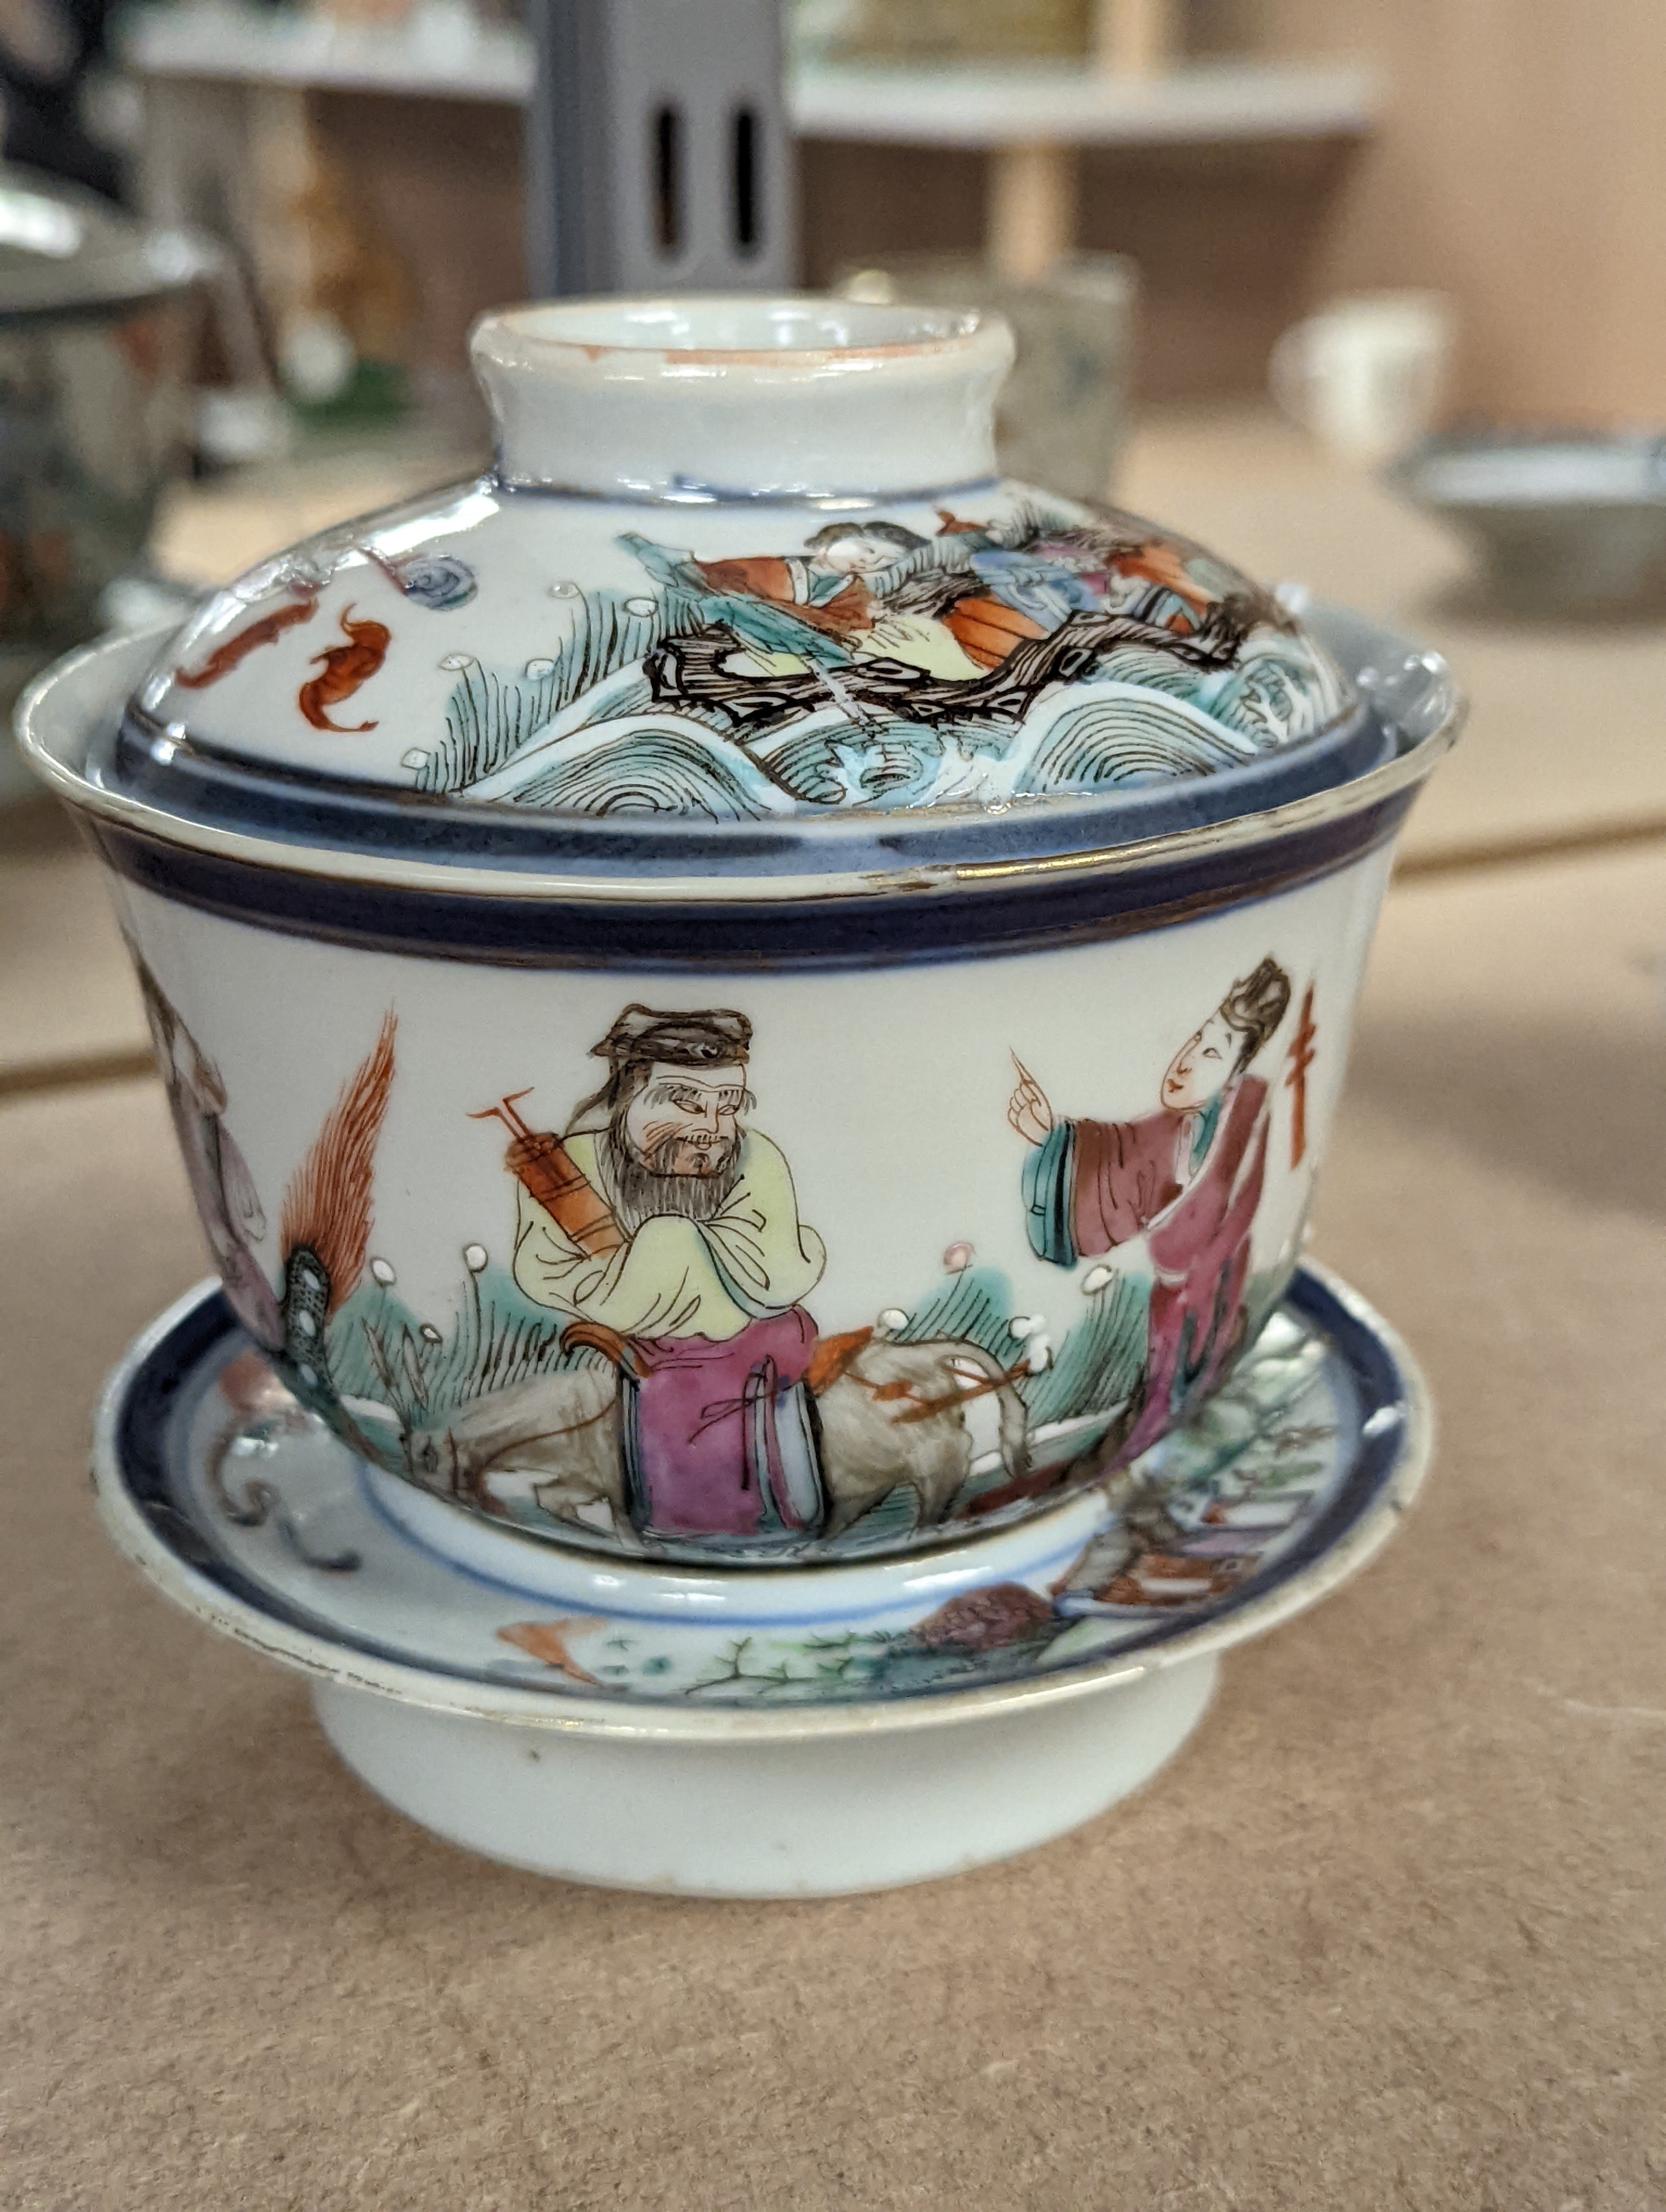 A late 19th century Chinese famille rose rice bowl, cover and stand, 11cm